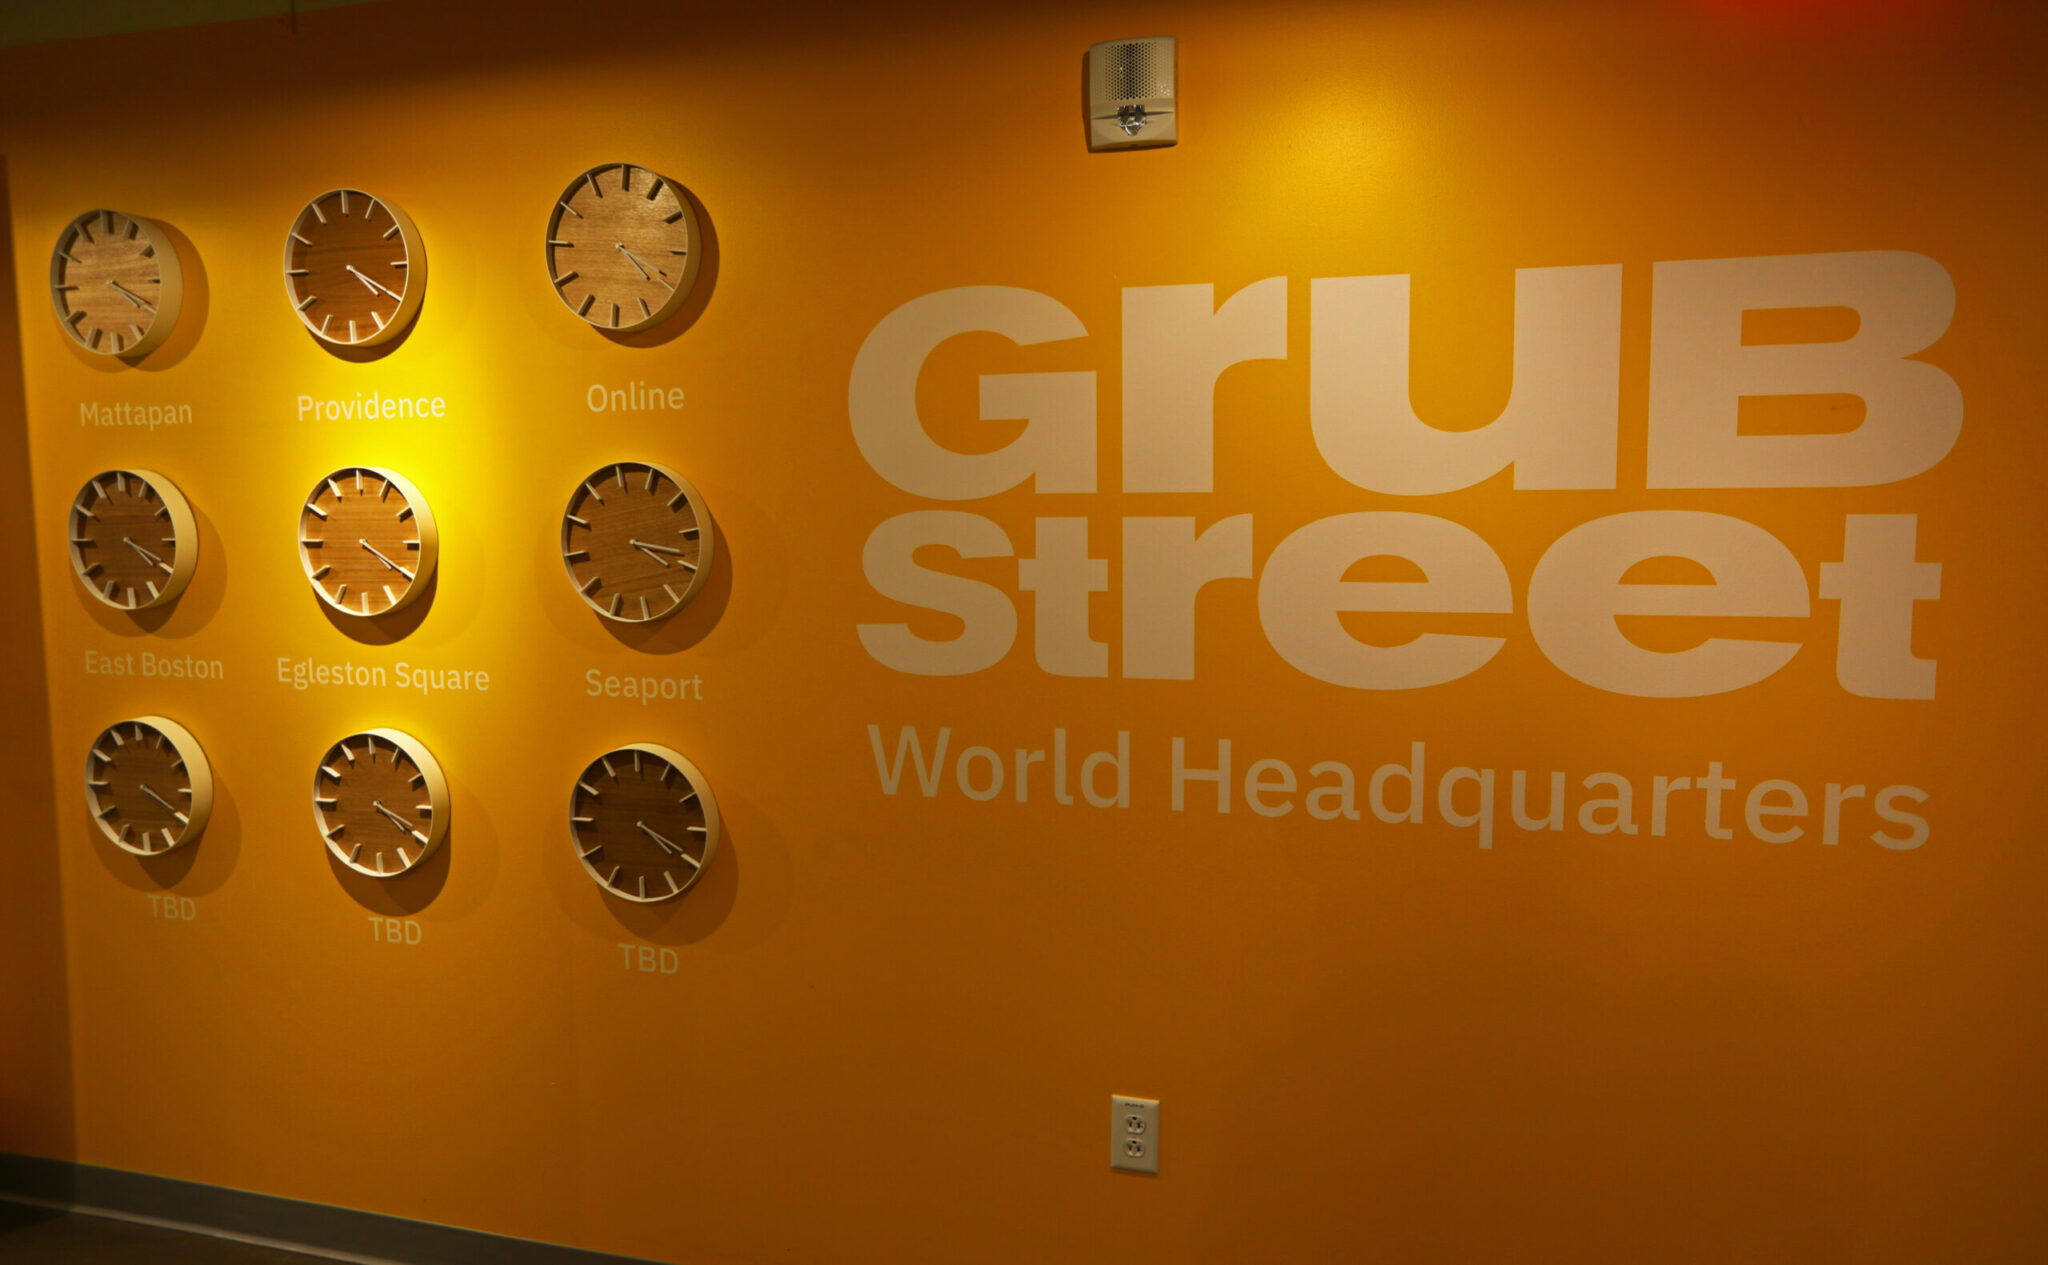 where does the word grubstreet come from and what does grubstreet mean scaled